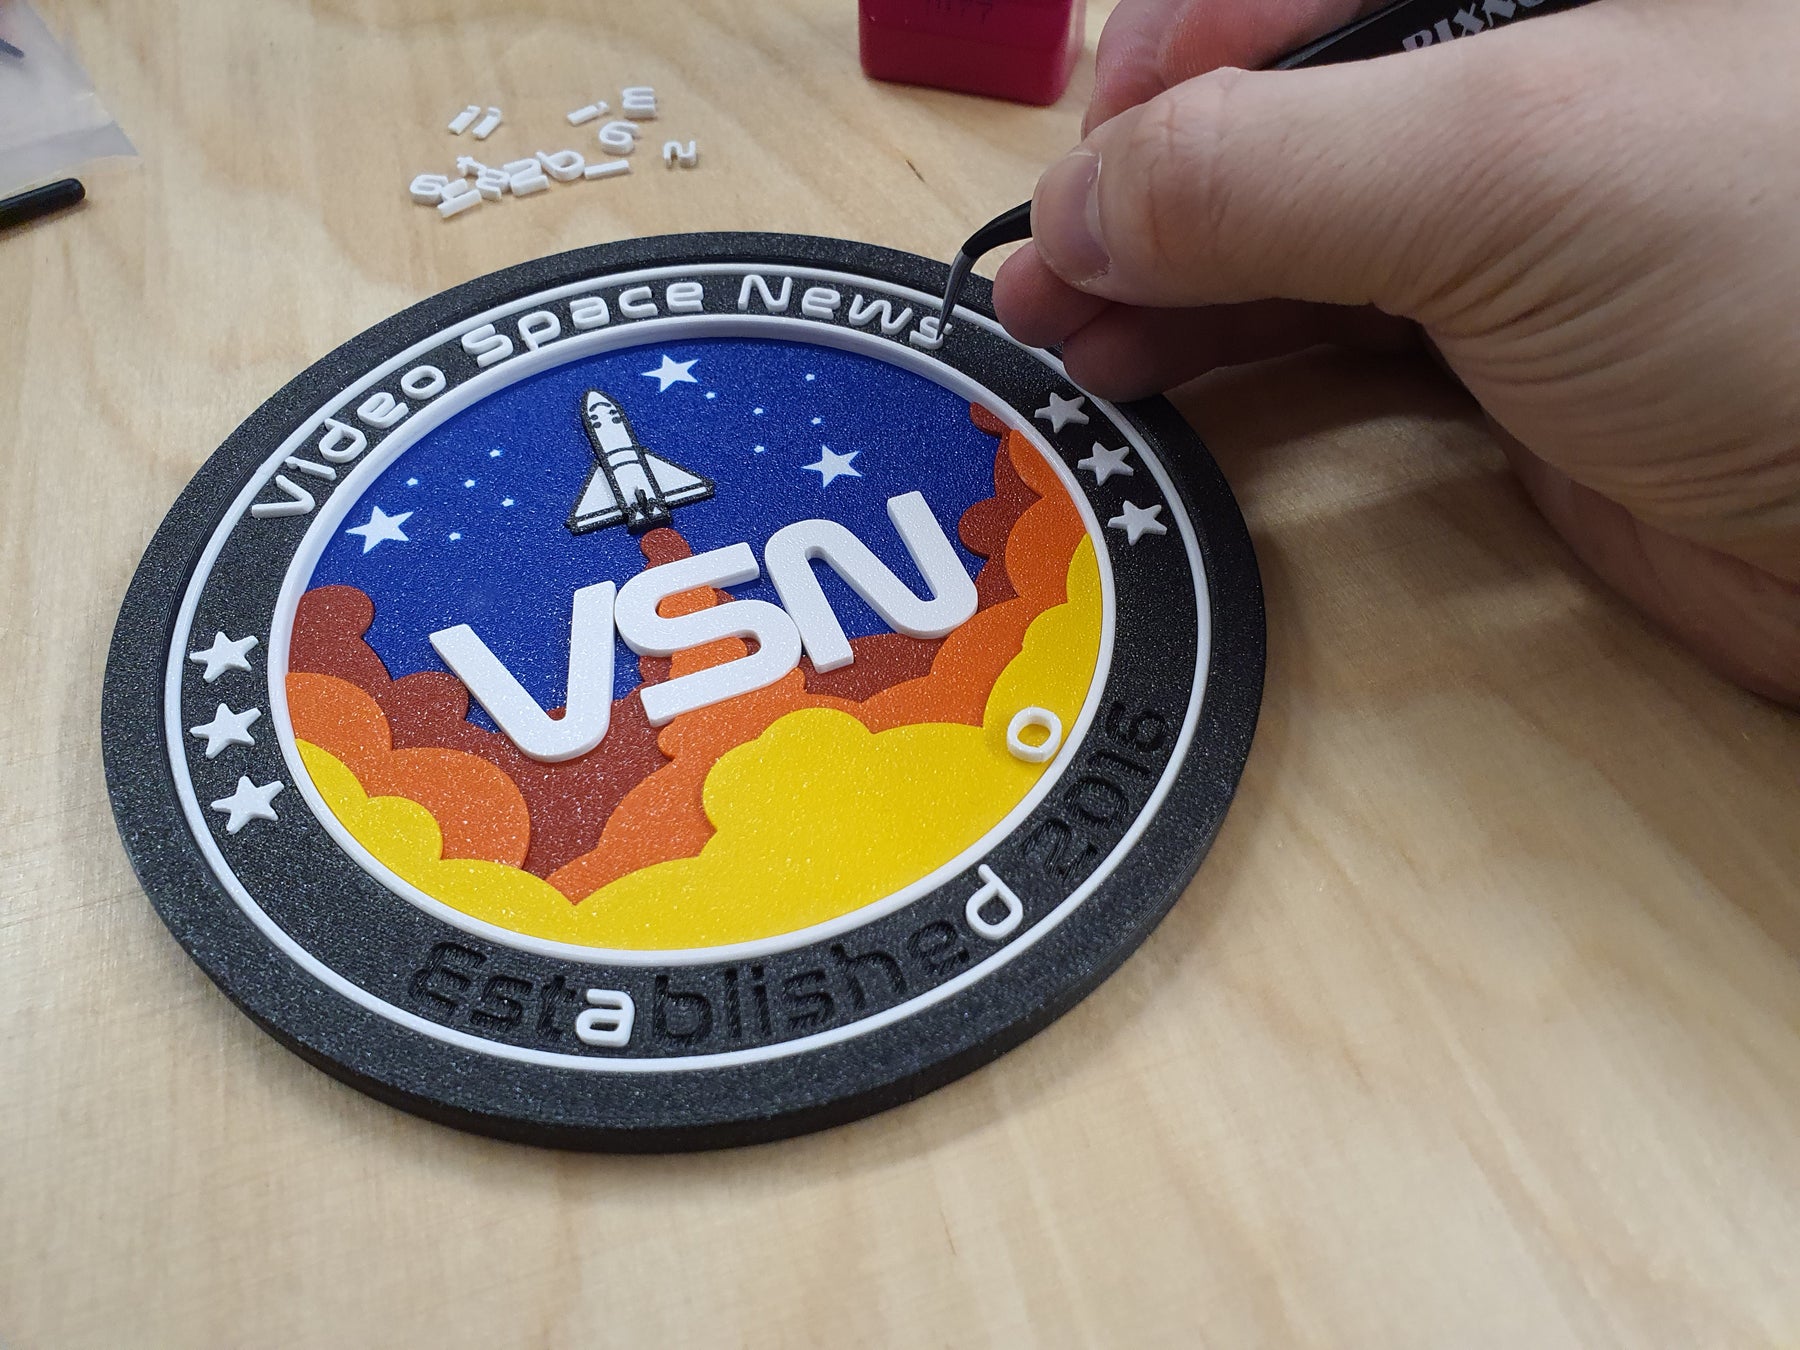 Video Space News Patch